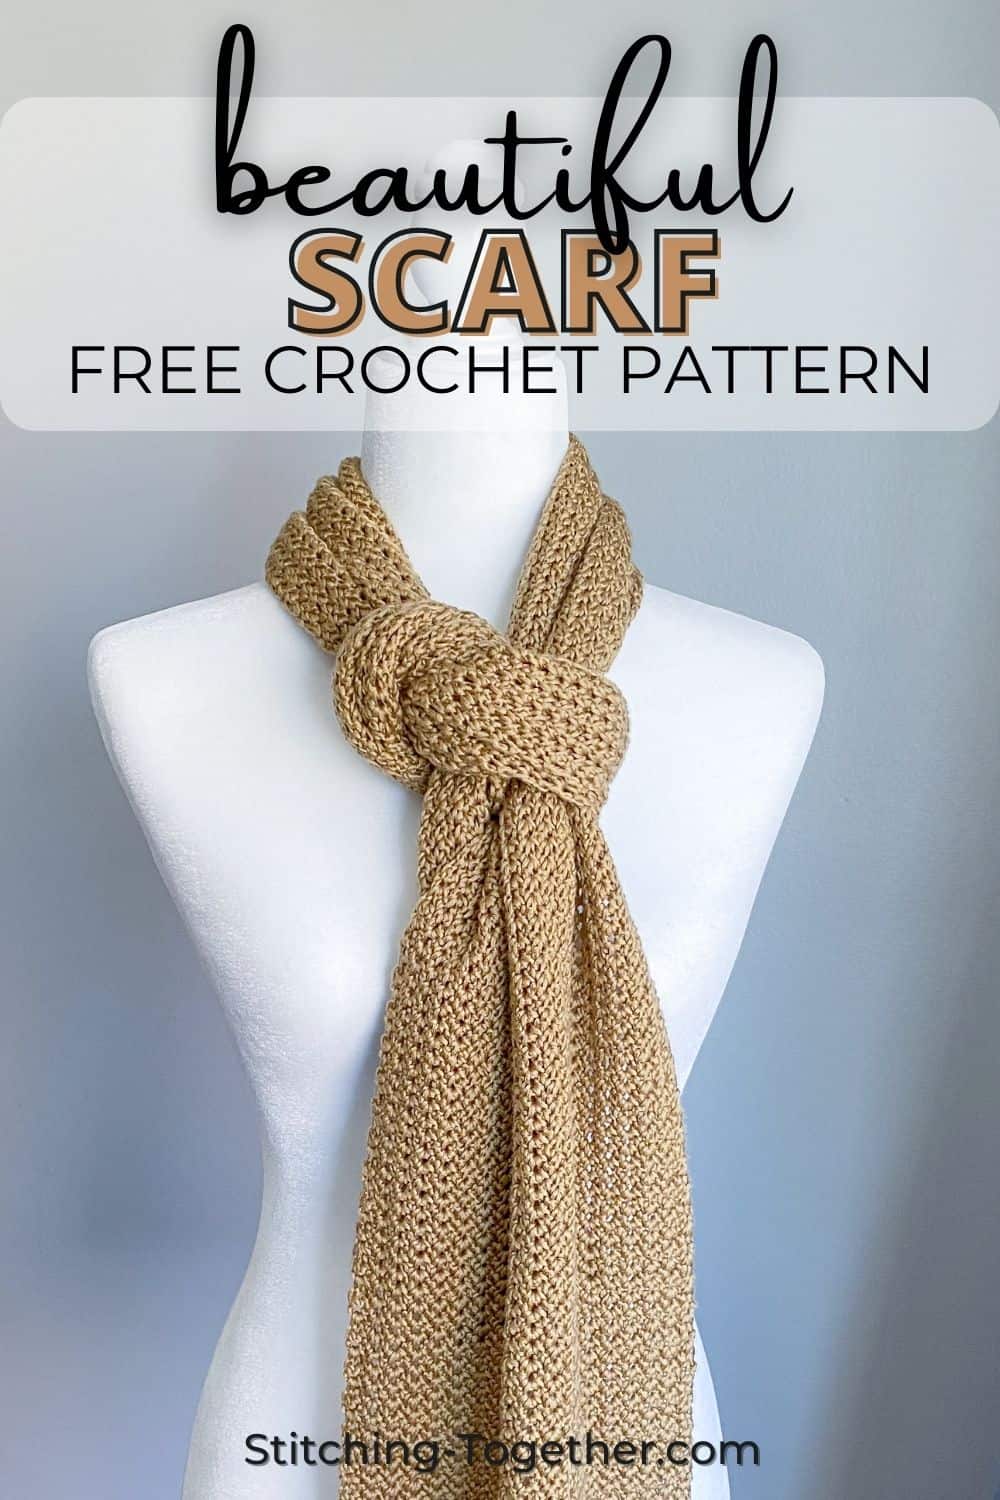 graphic with text reading "beautiful scarf free crochet pattern" and a image of gold colored scarf wrapped on a mannequin